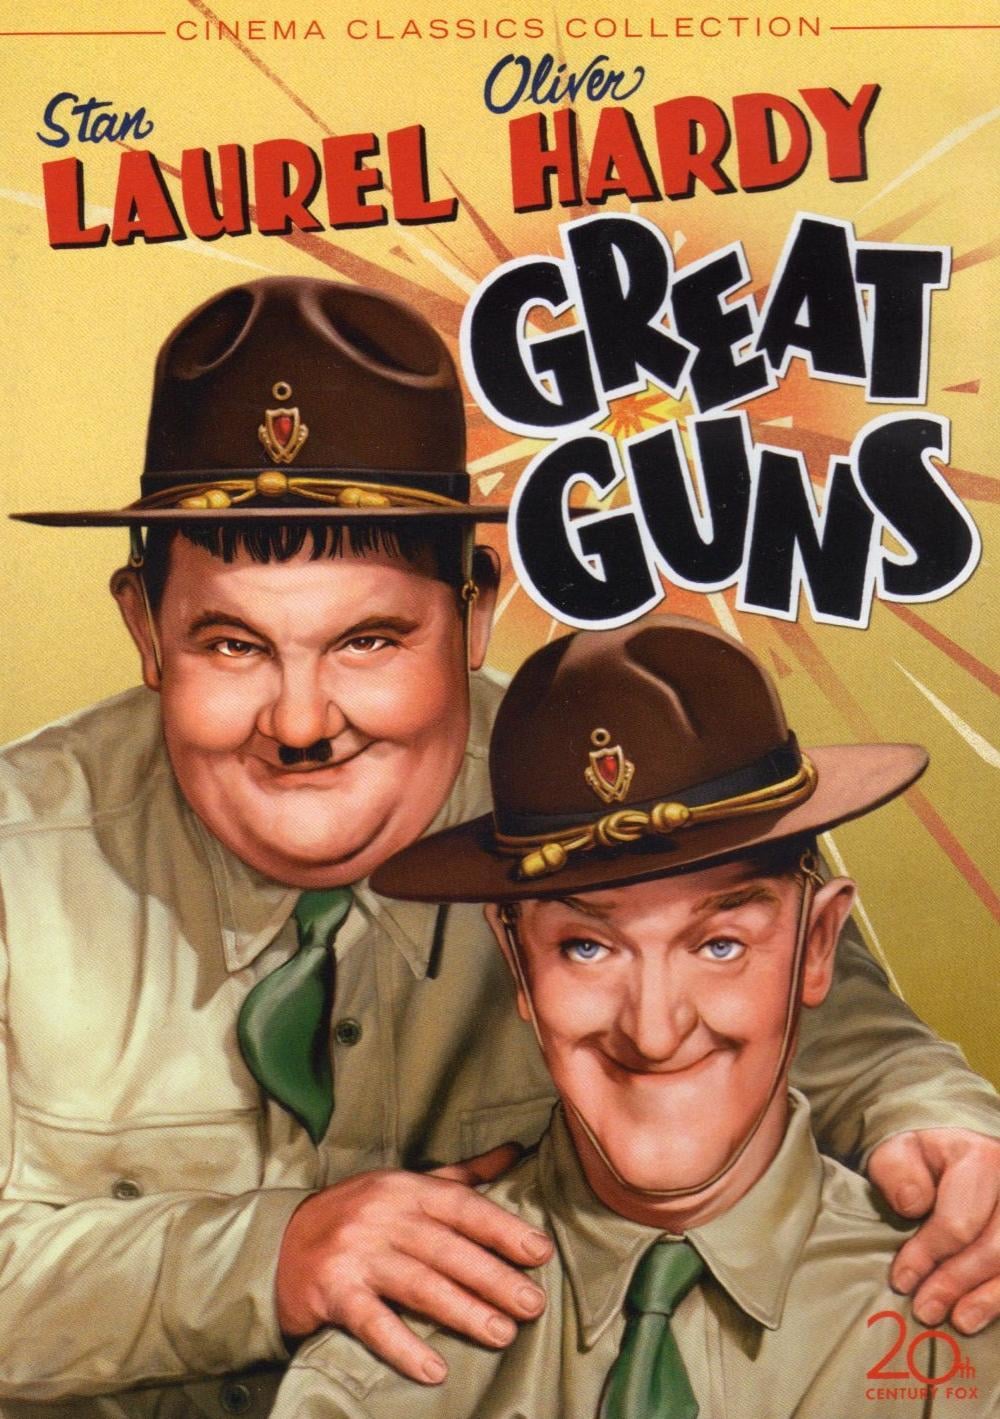 Poster for the movie "Great Guns"